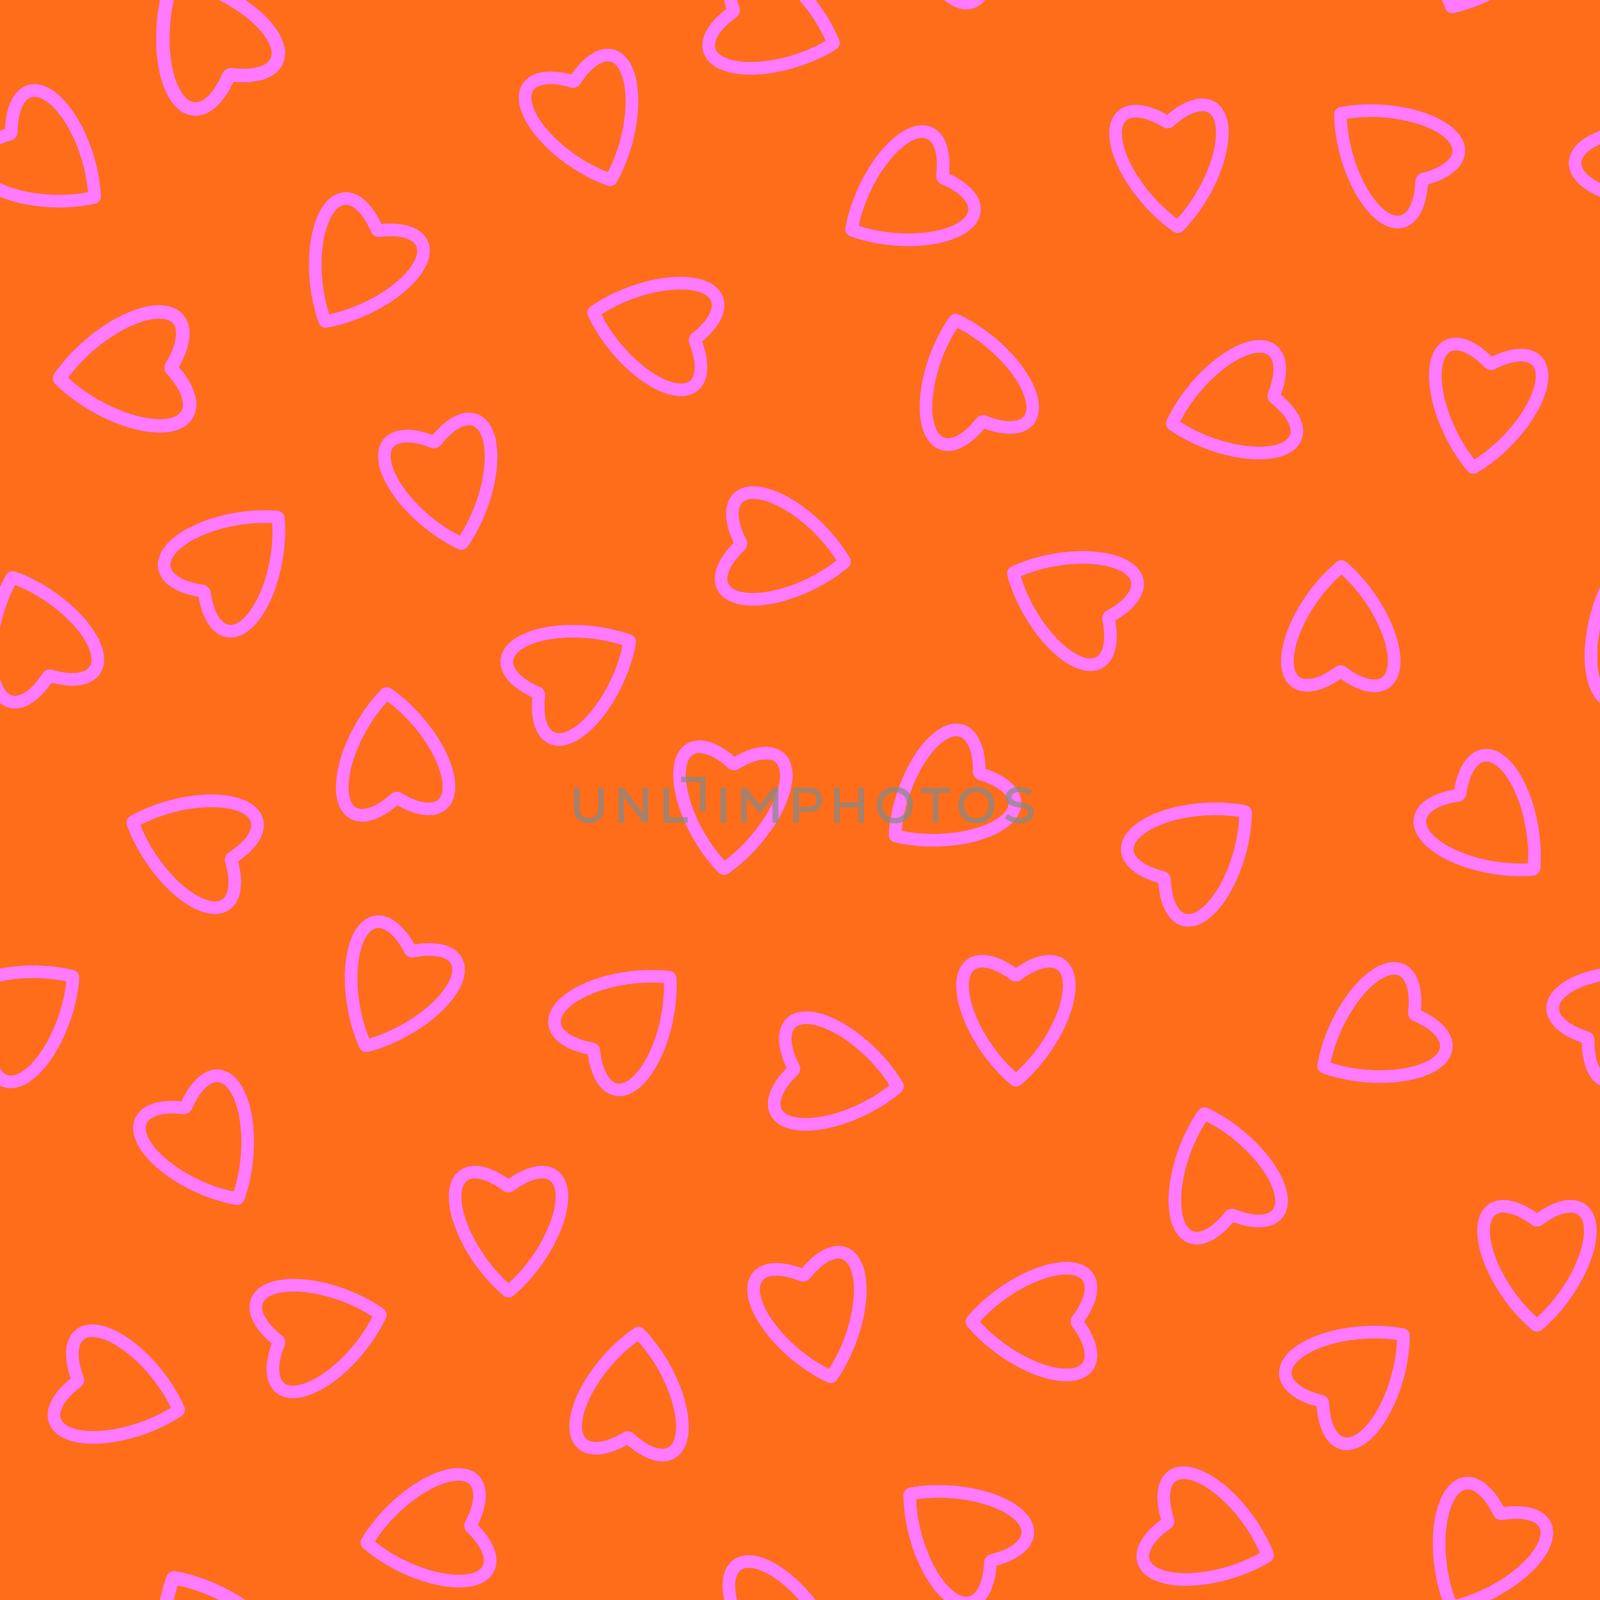 Simple hearts seamless pattern,endless chaotic texture made of tiny heart silhouettes.Valentines,mothers day background.Great for Easter,wedding,scrapbook,gift wrapping paper,textiles.Pink on orange.